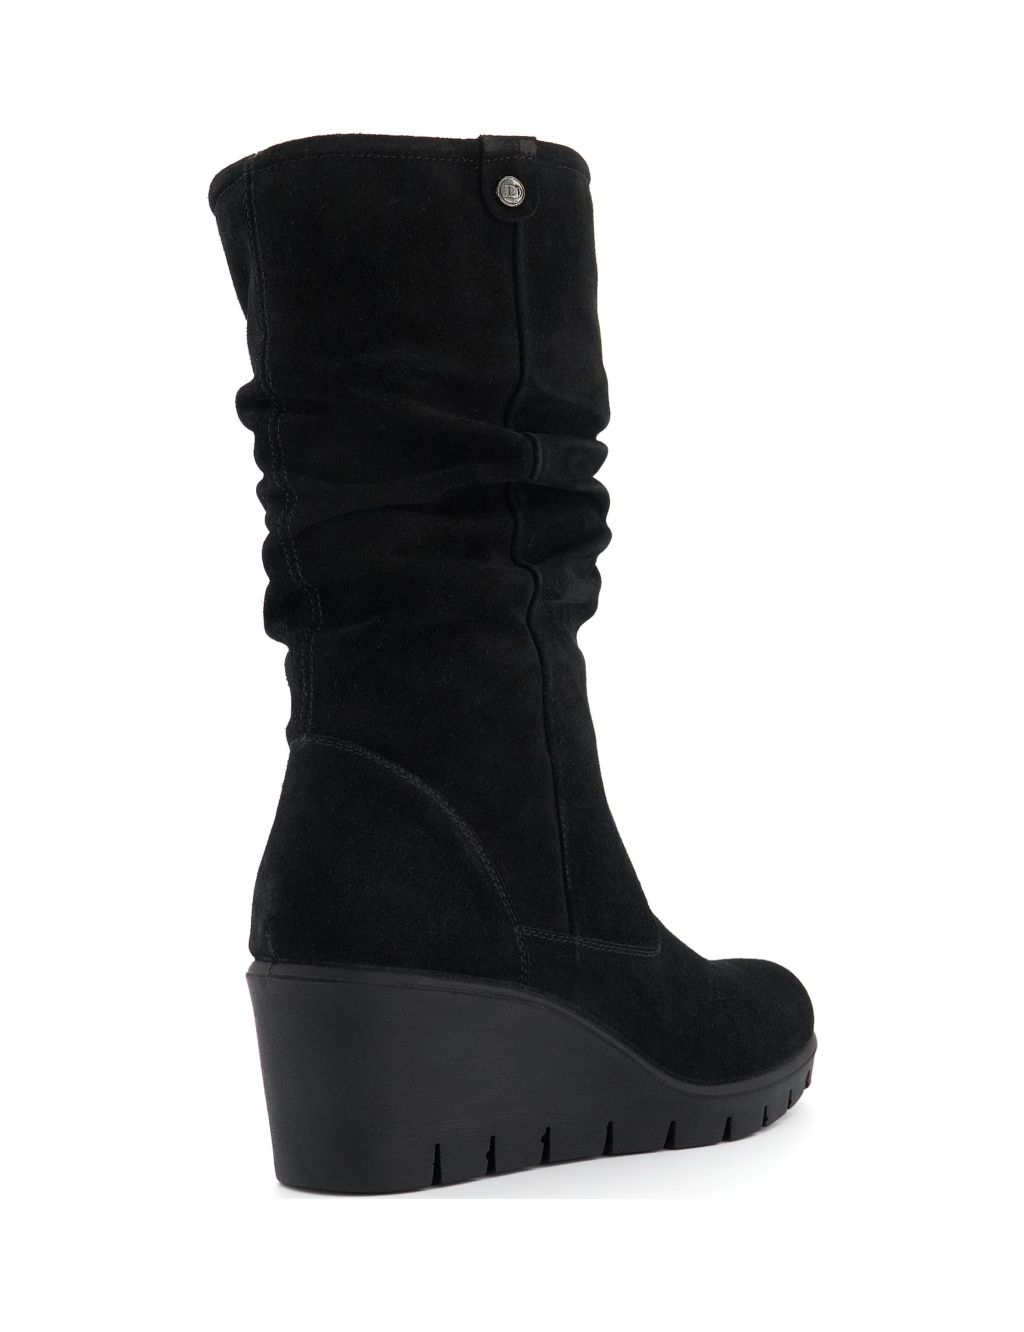 Suede Ruched Wedge Round Toe Boots image 3